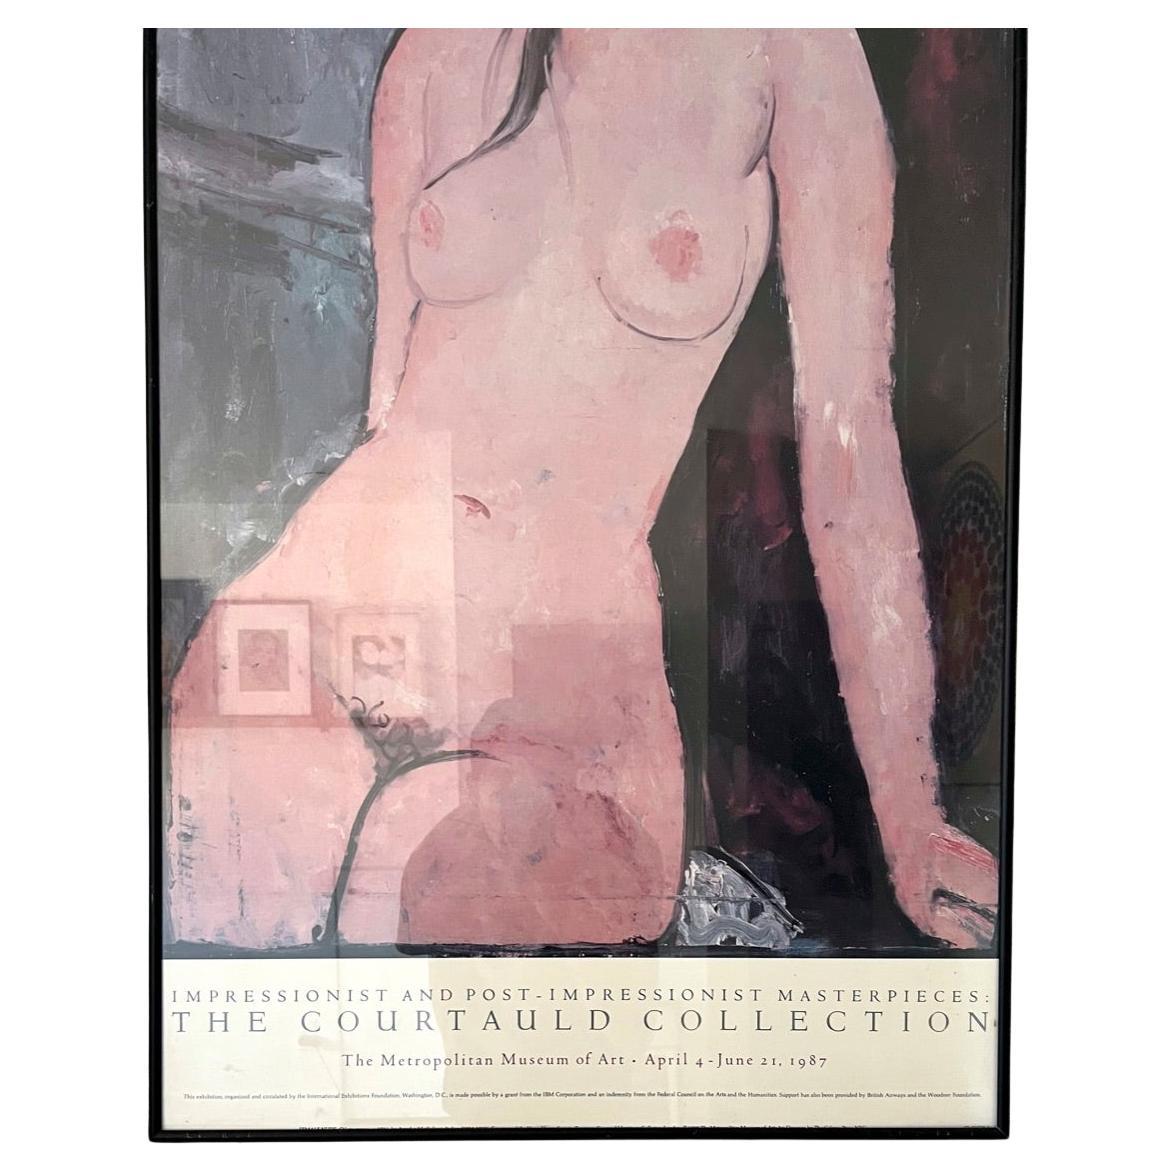 Amedeo Modigliani was an Italian artist known for his distinctive style and unique approach to portraiture and figurative art. Born in Livorno, Italy, in 1884, Modigliani showed an early interest in art and attended art schools in Florence and